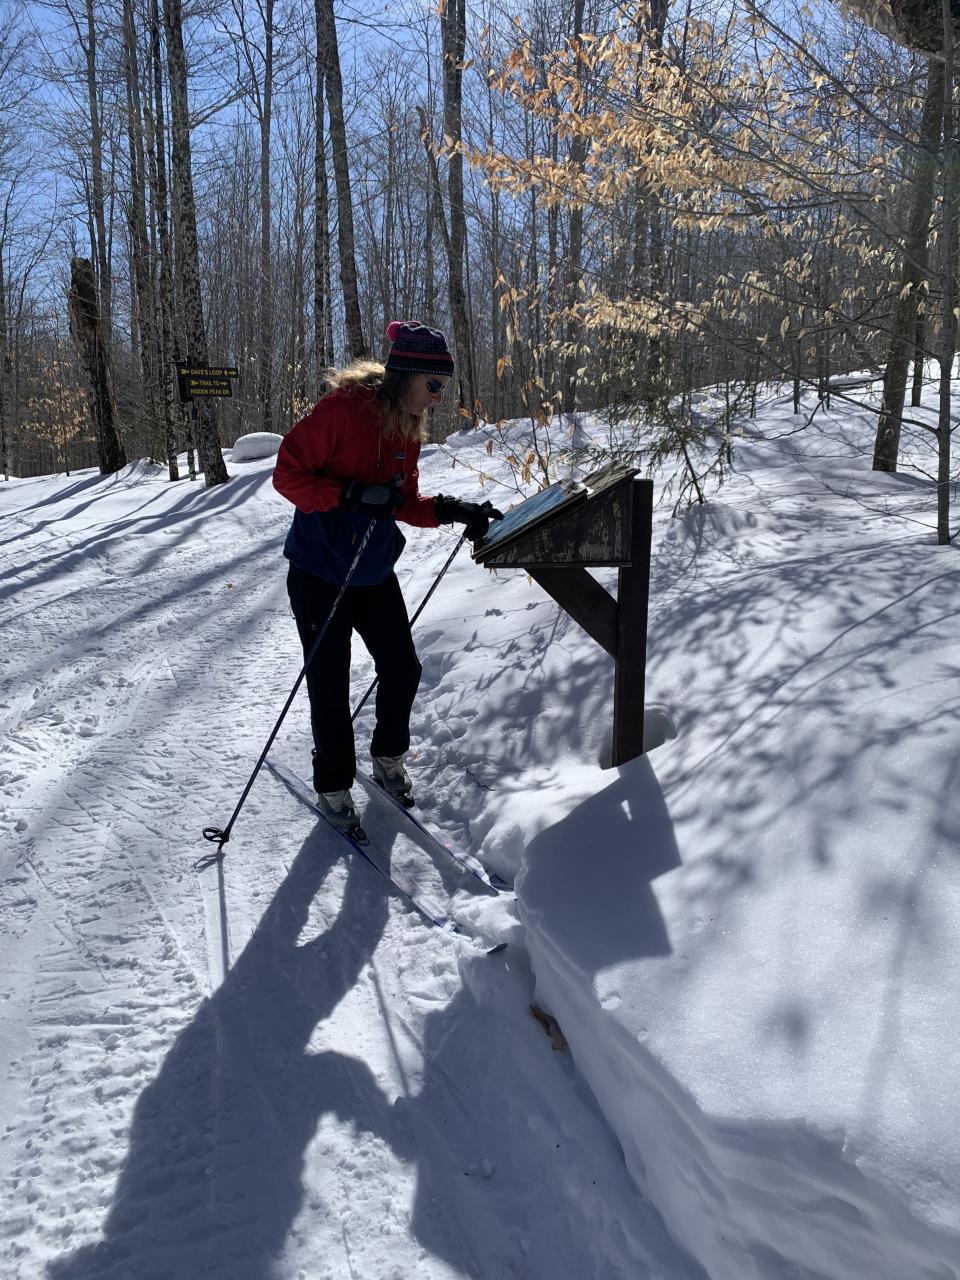 A woman signs in at the trail register on cross-country skis.